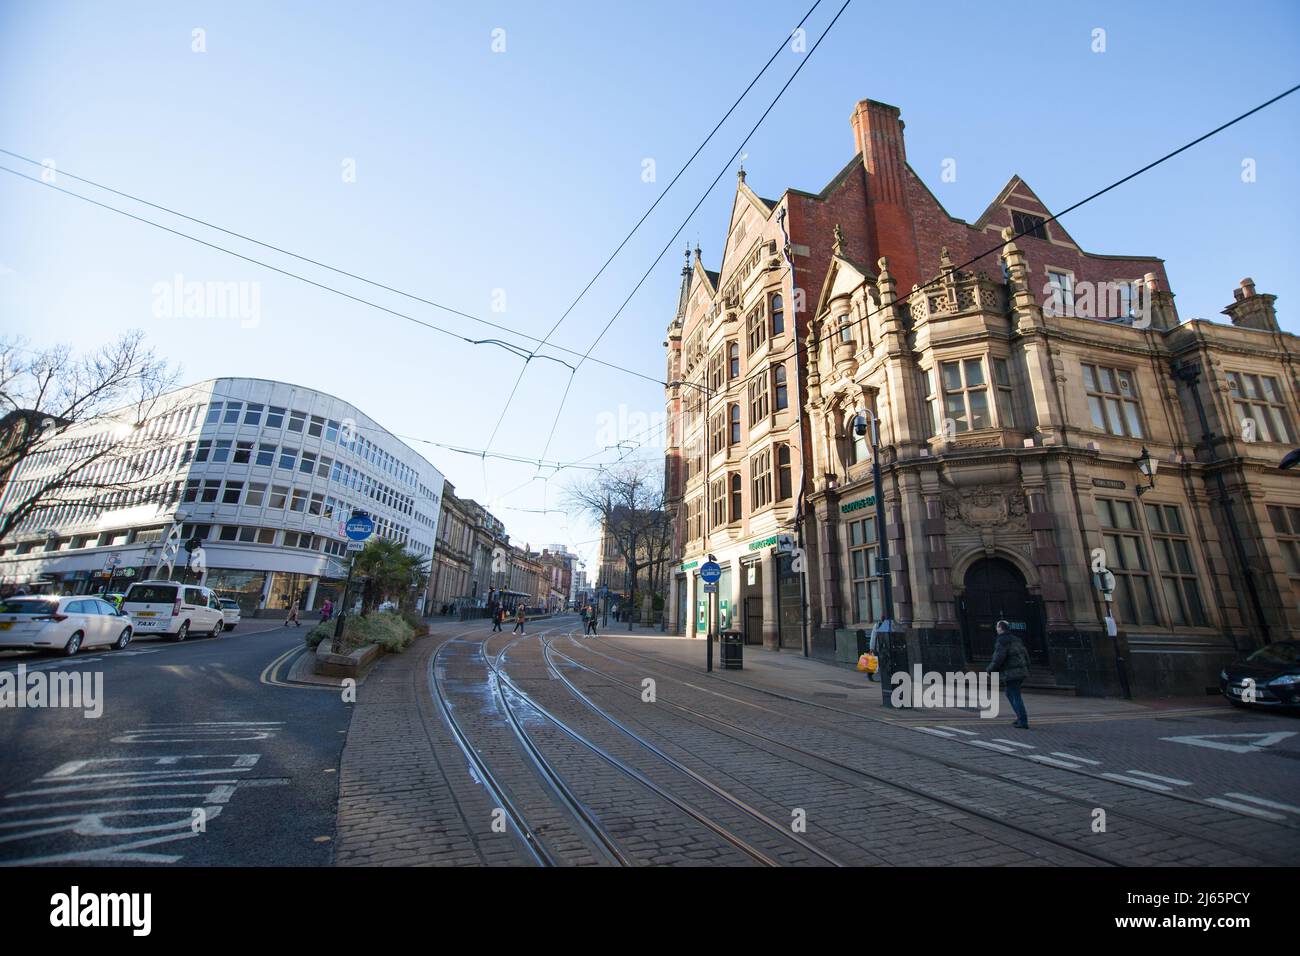 Views of The High Street in Sheffield, South Yorkshire in the UK Stock Photo